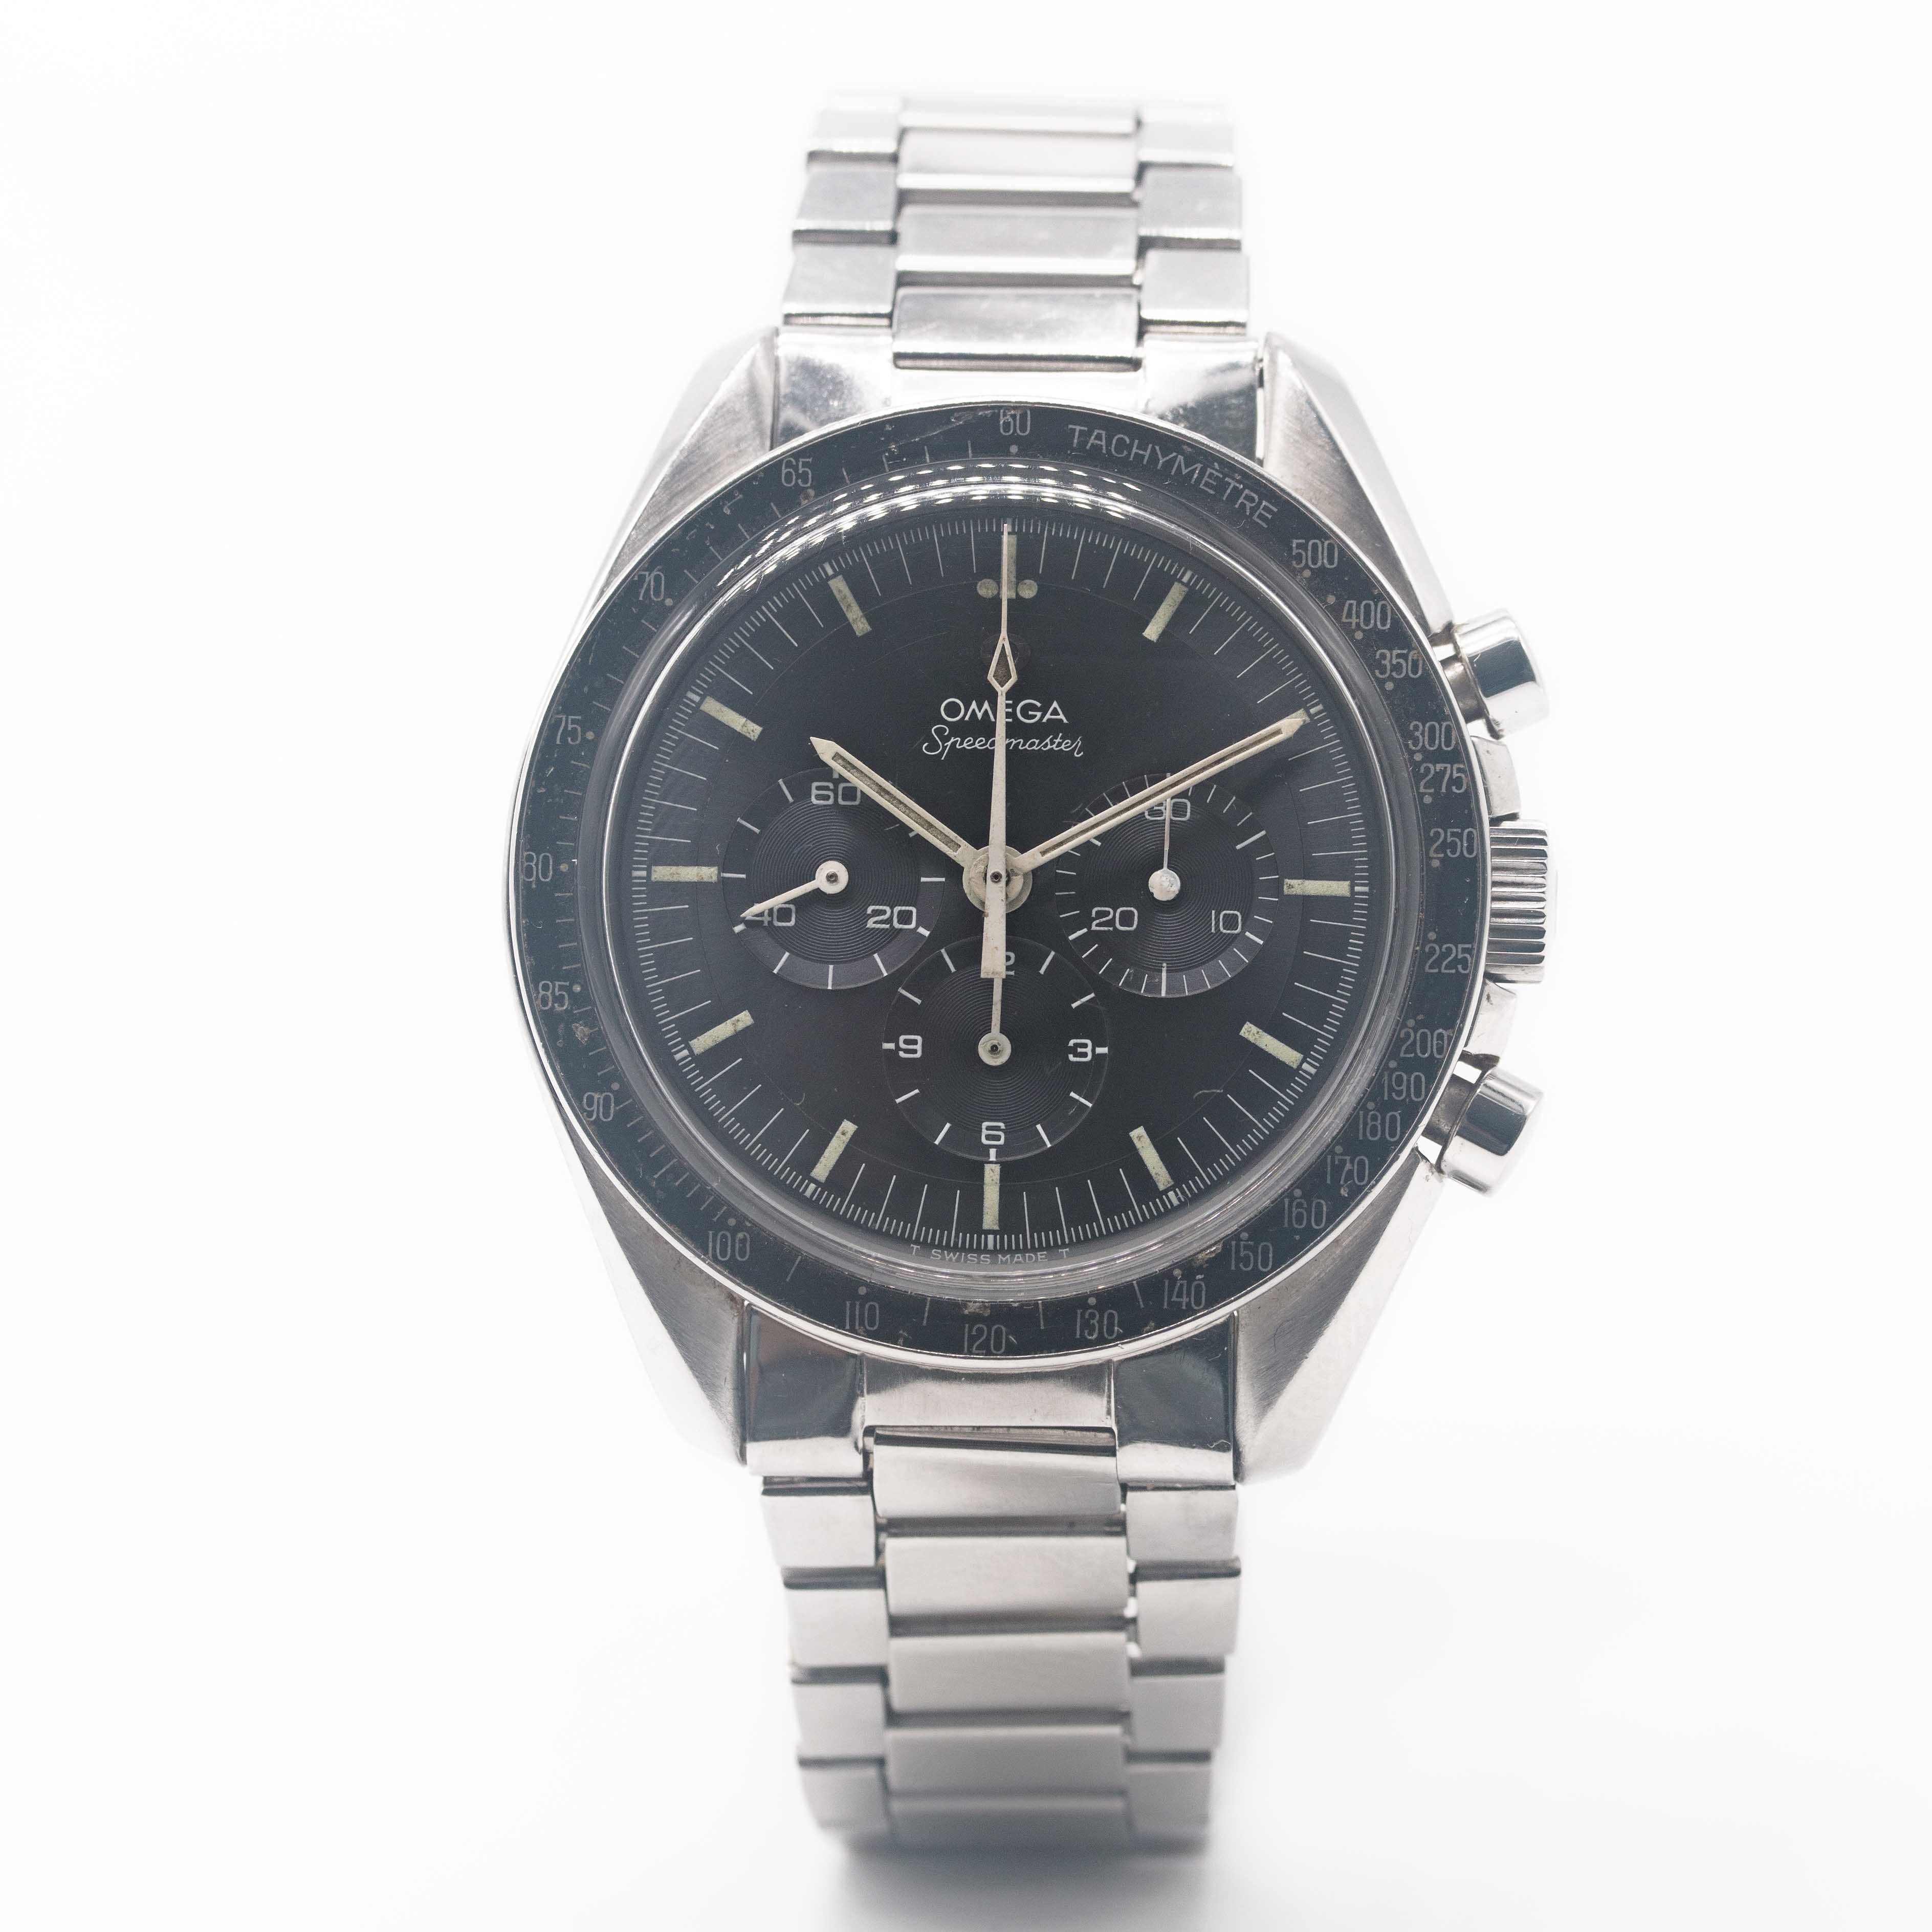 A VERY RARE GENTLEMAN'S STAINLESS STEEL OMEGA SPEEDMASTER "PRE MOON" CHRONOGRAPH BRACELET WATCH - Image 5 of 14